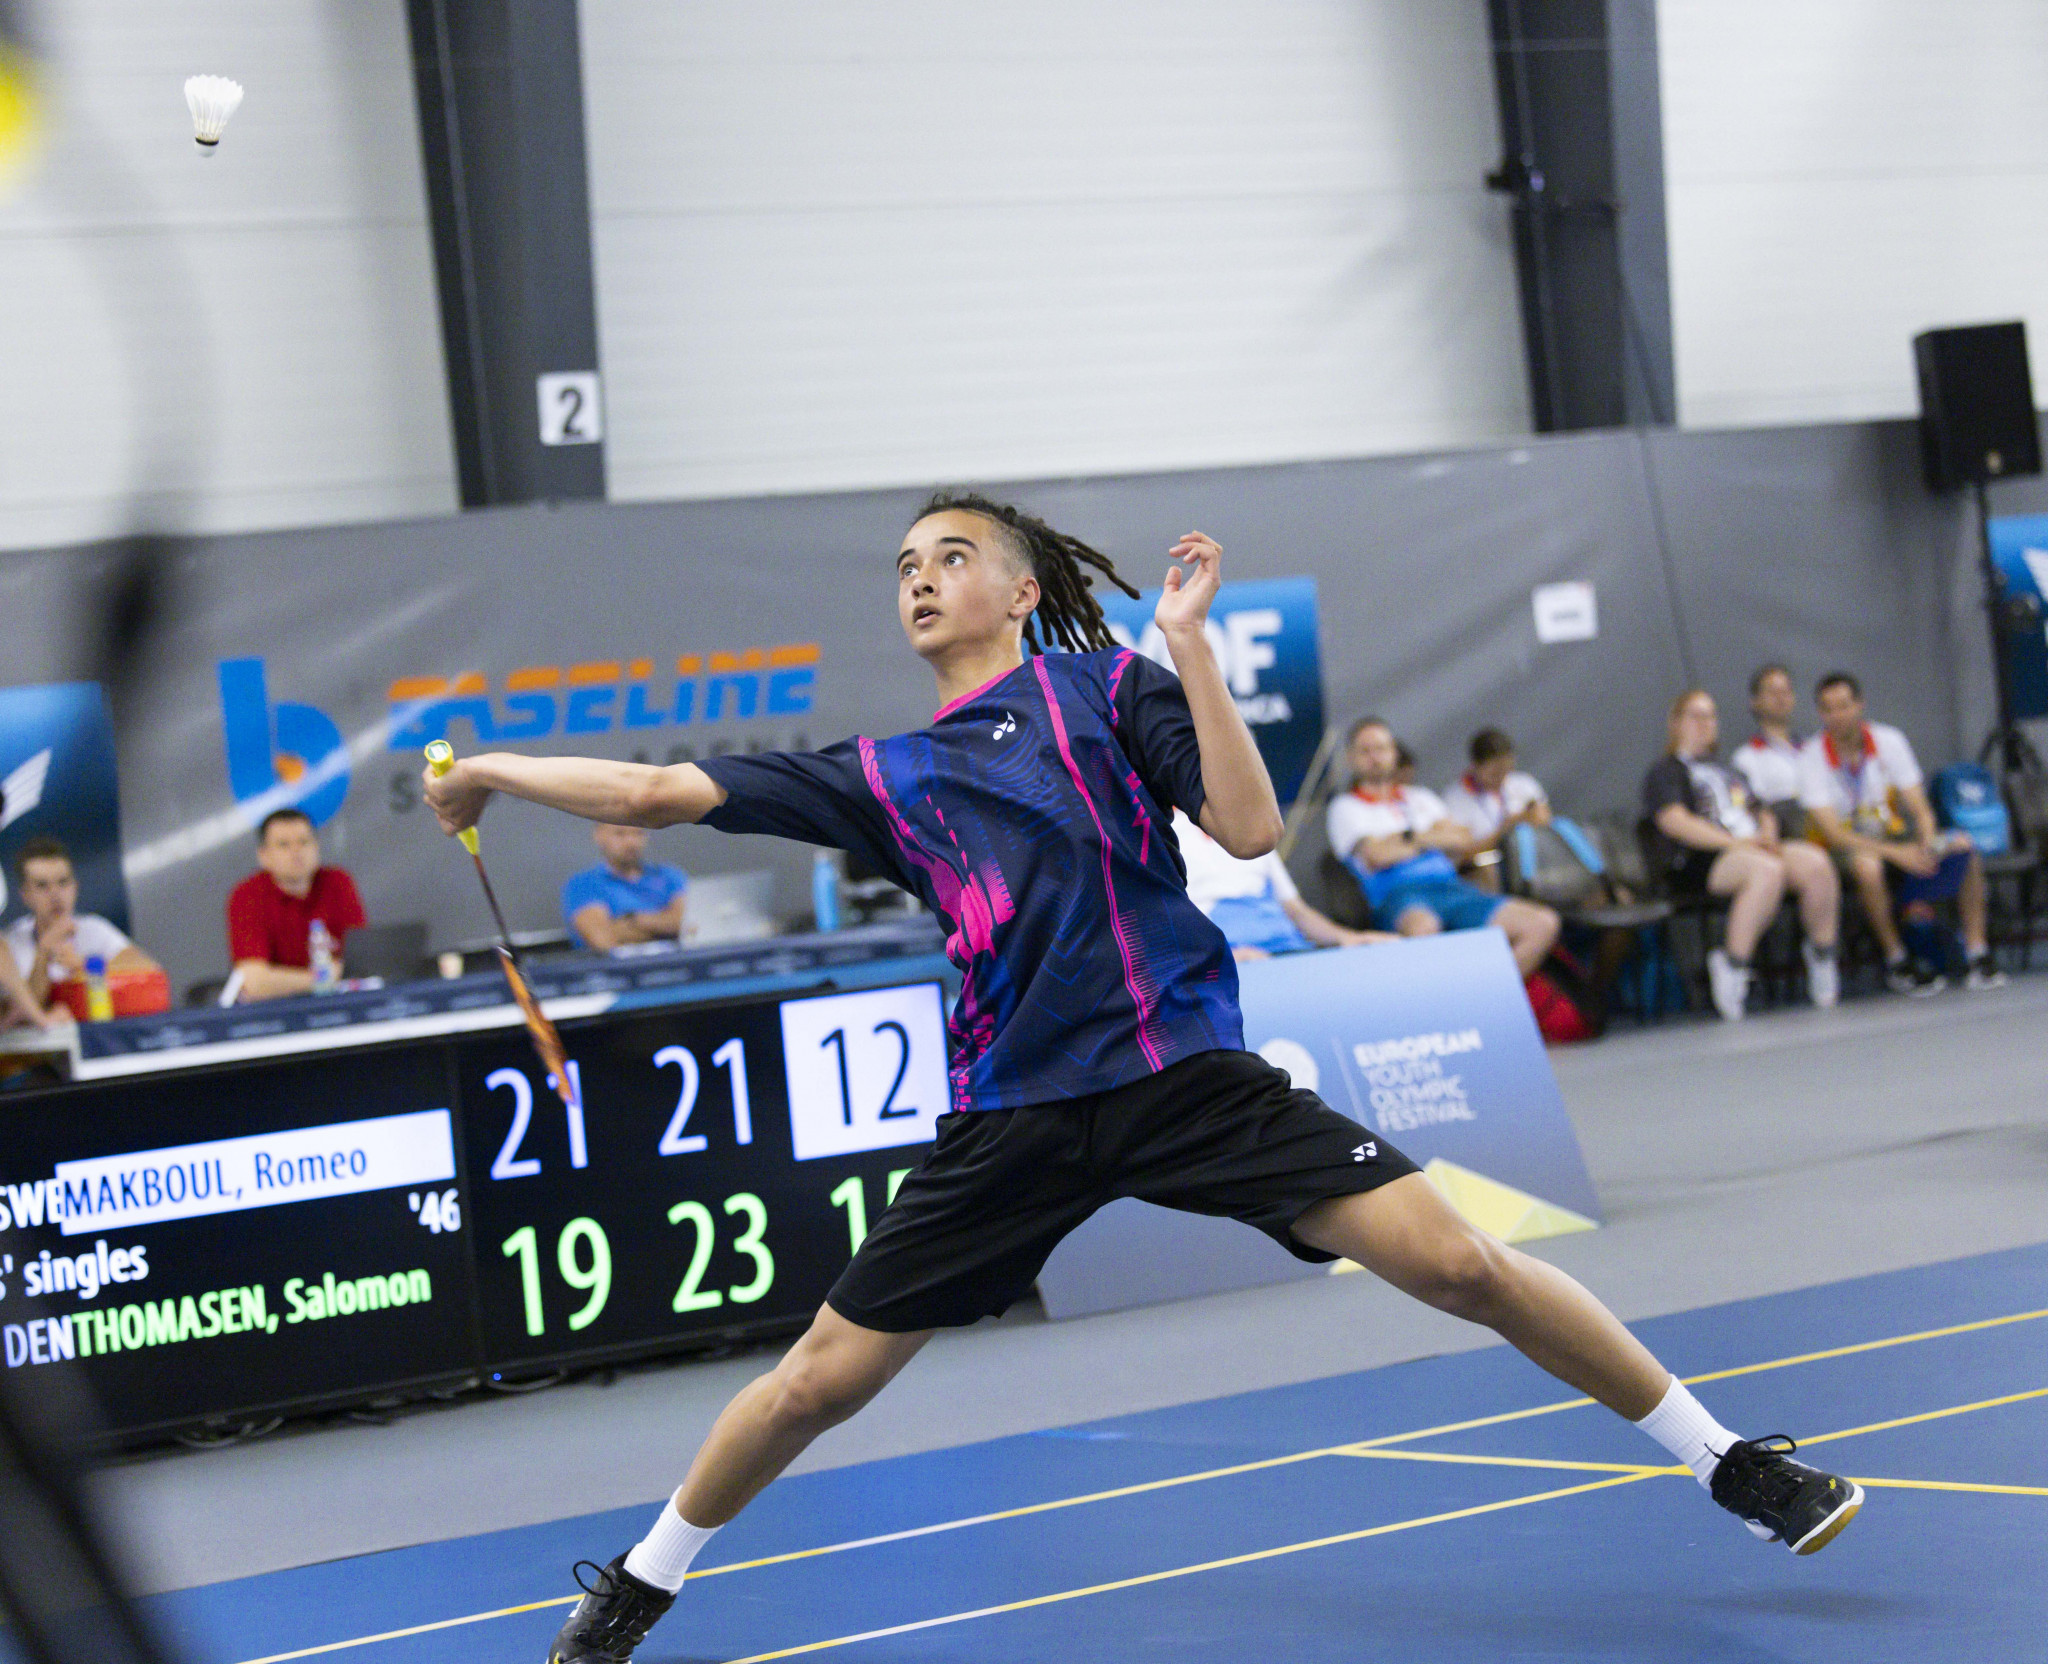 Badminton starlets highlight day four's action at Banská Bystrica EYOF